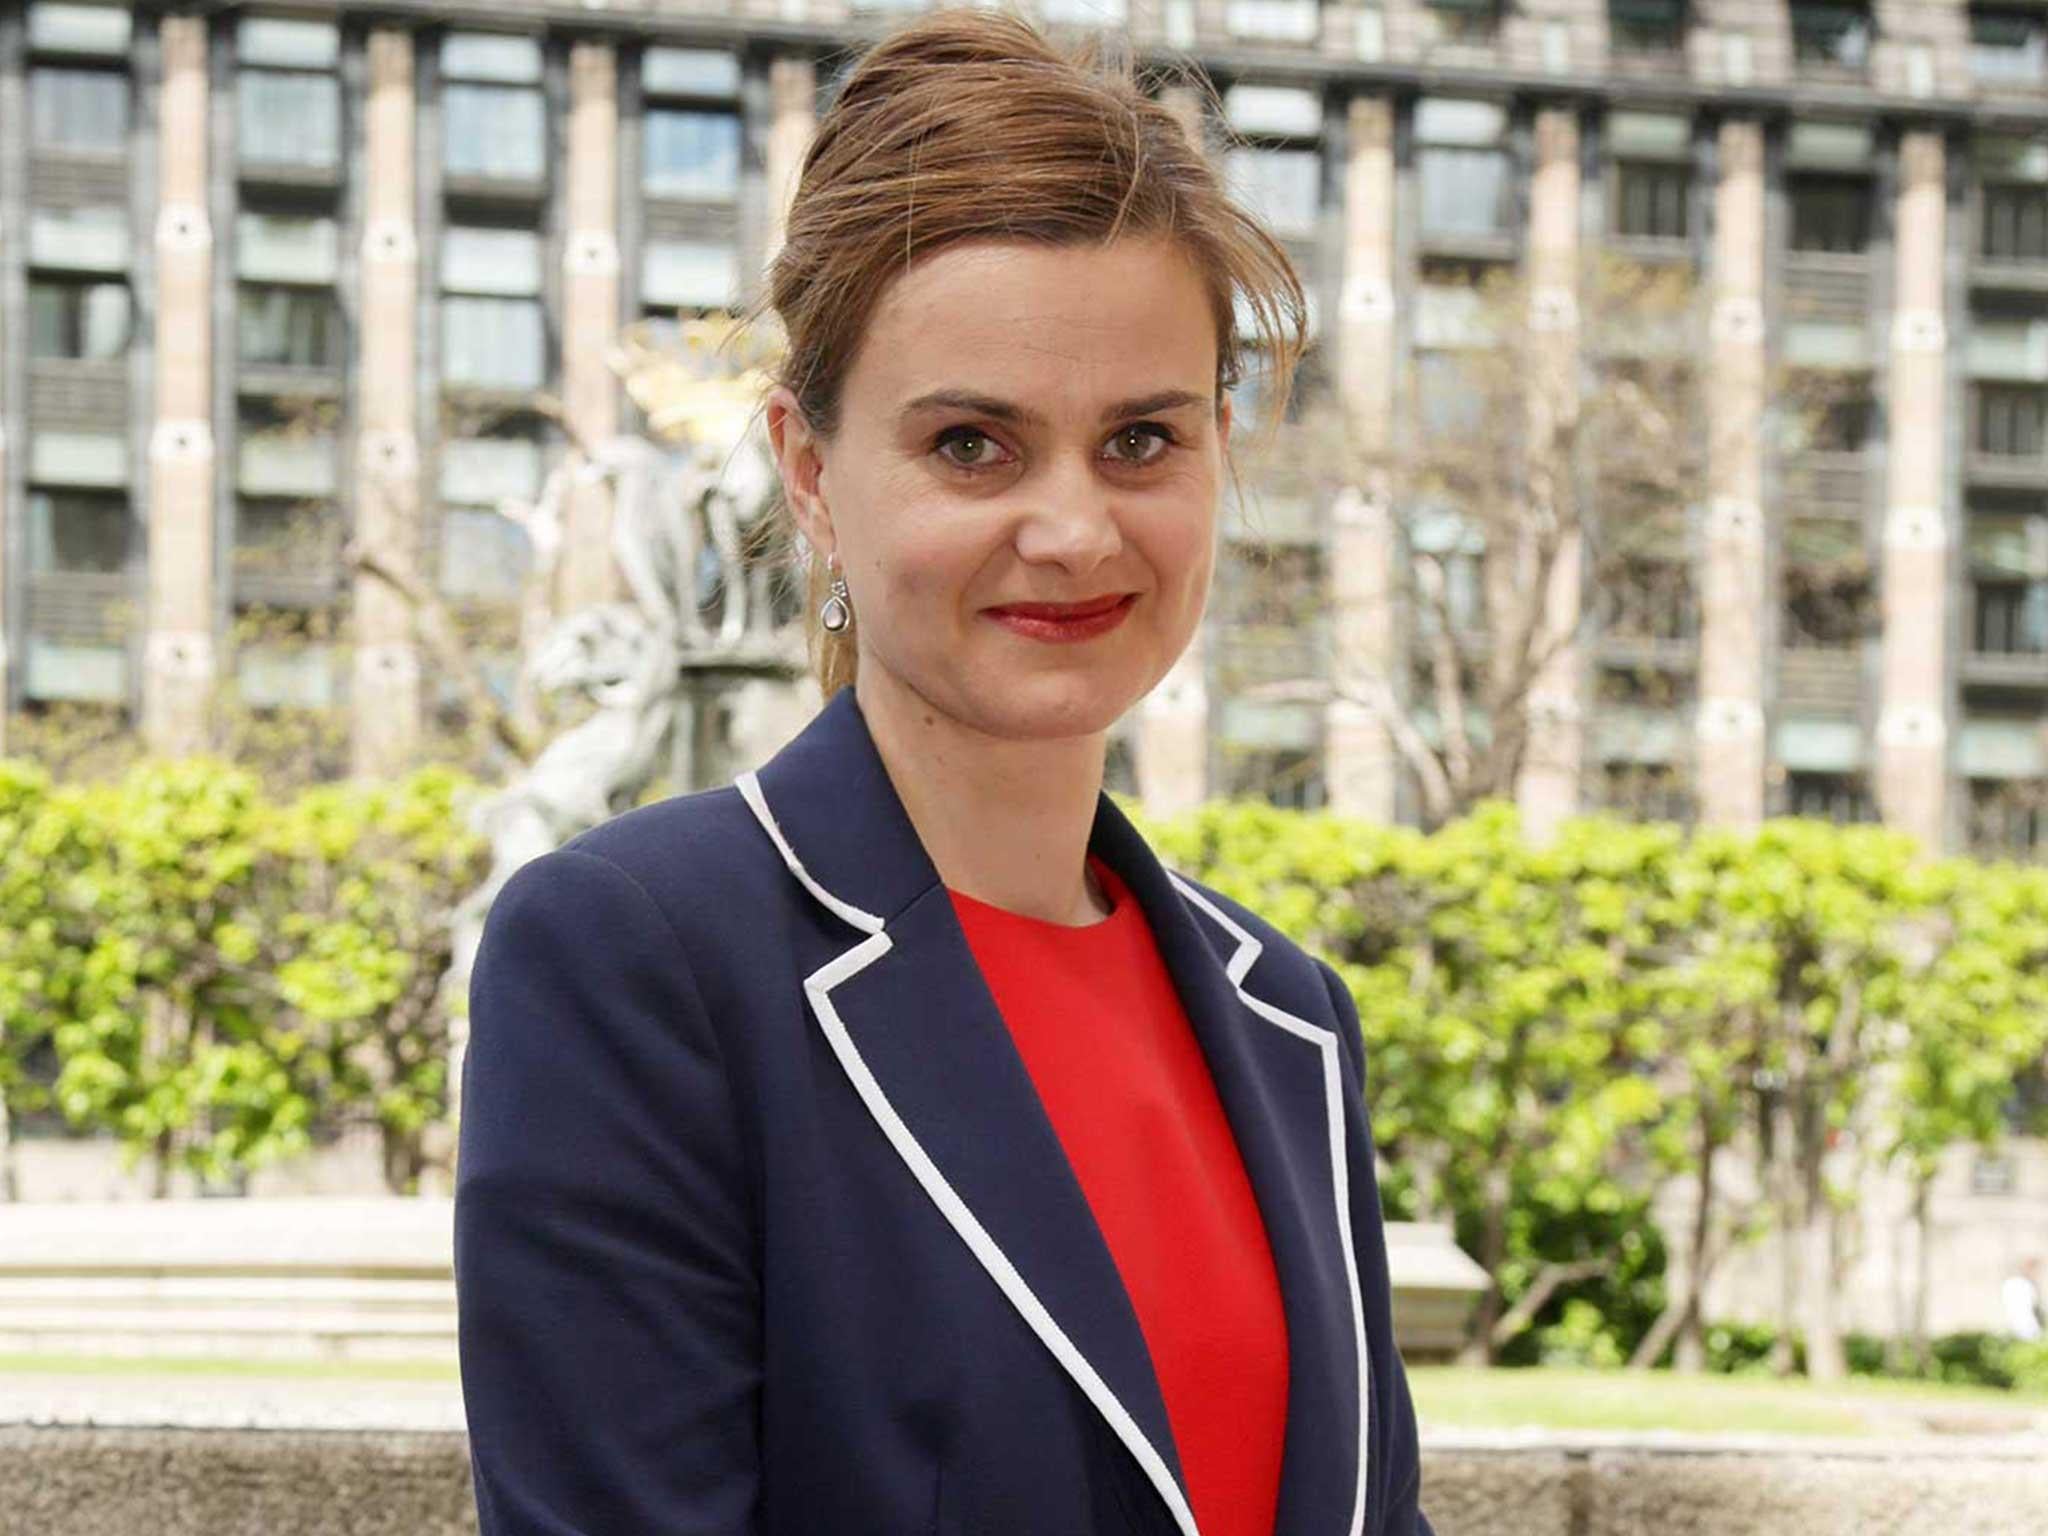 Jo Cox was murdered by neo-Nazi Thomas Mair in 2016